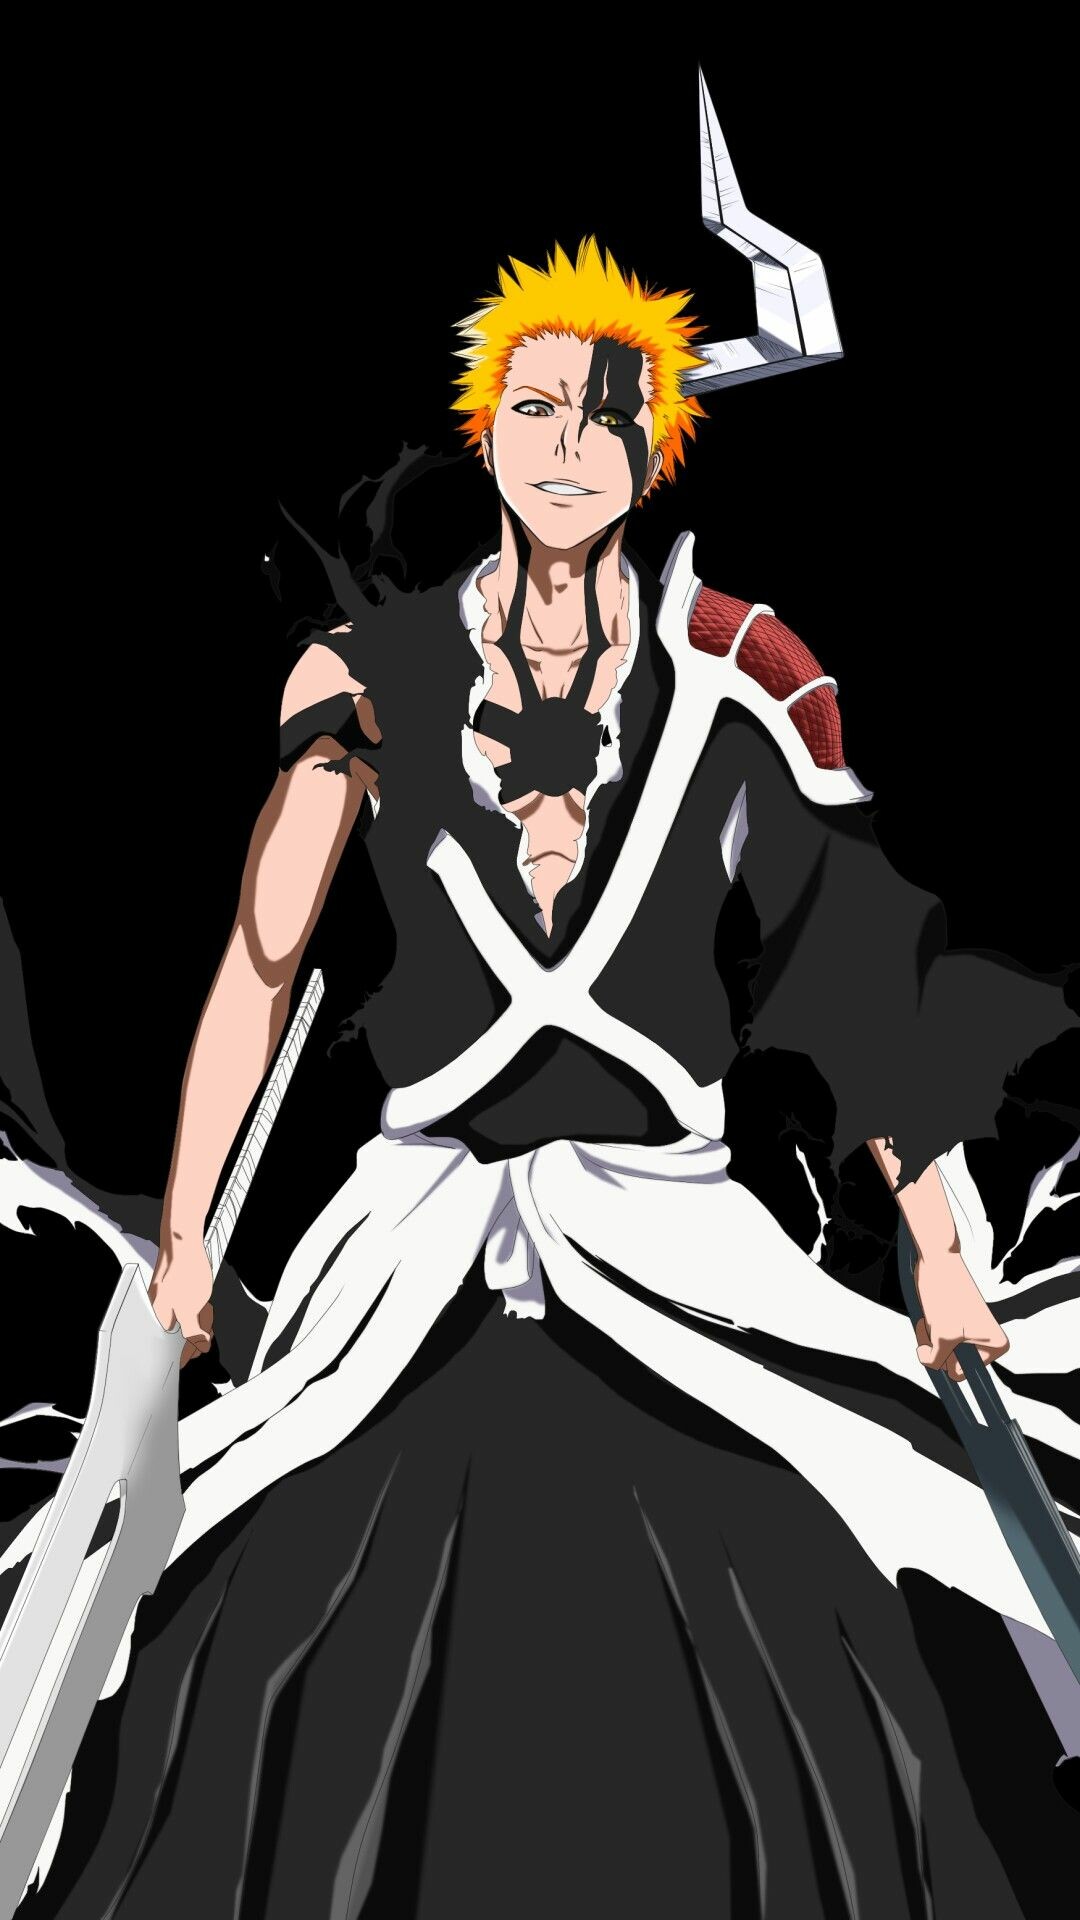 Bleach: Thousand Year Blood War: Animated by Pierrot and directed by Tomohisa Taguchi, Premiered in October 2022. 1080x1920 Full HD Wallpaper.